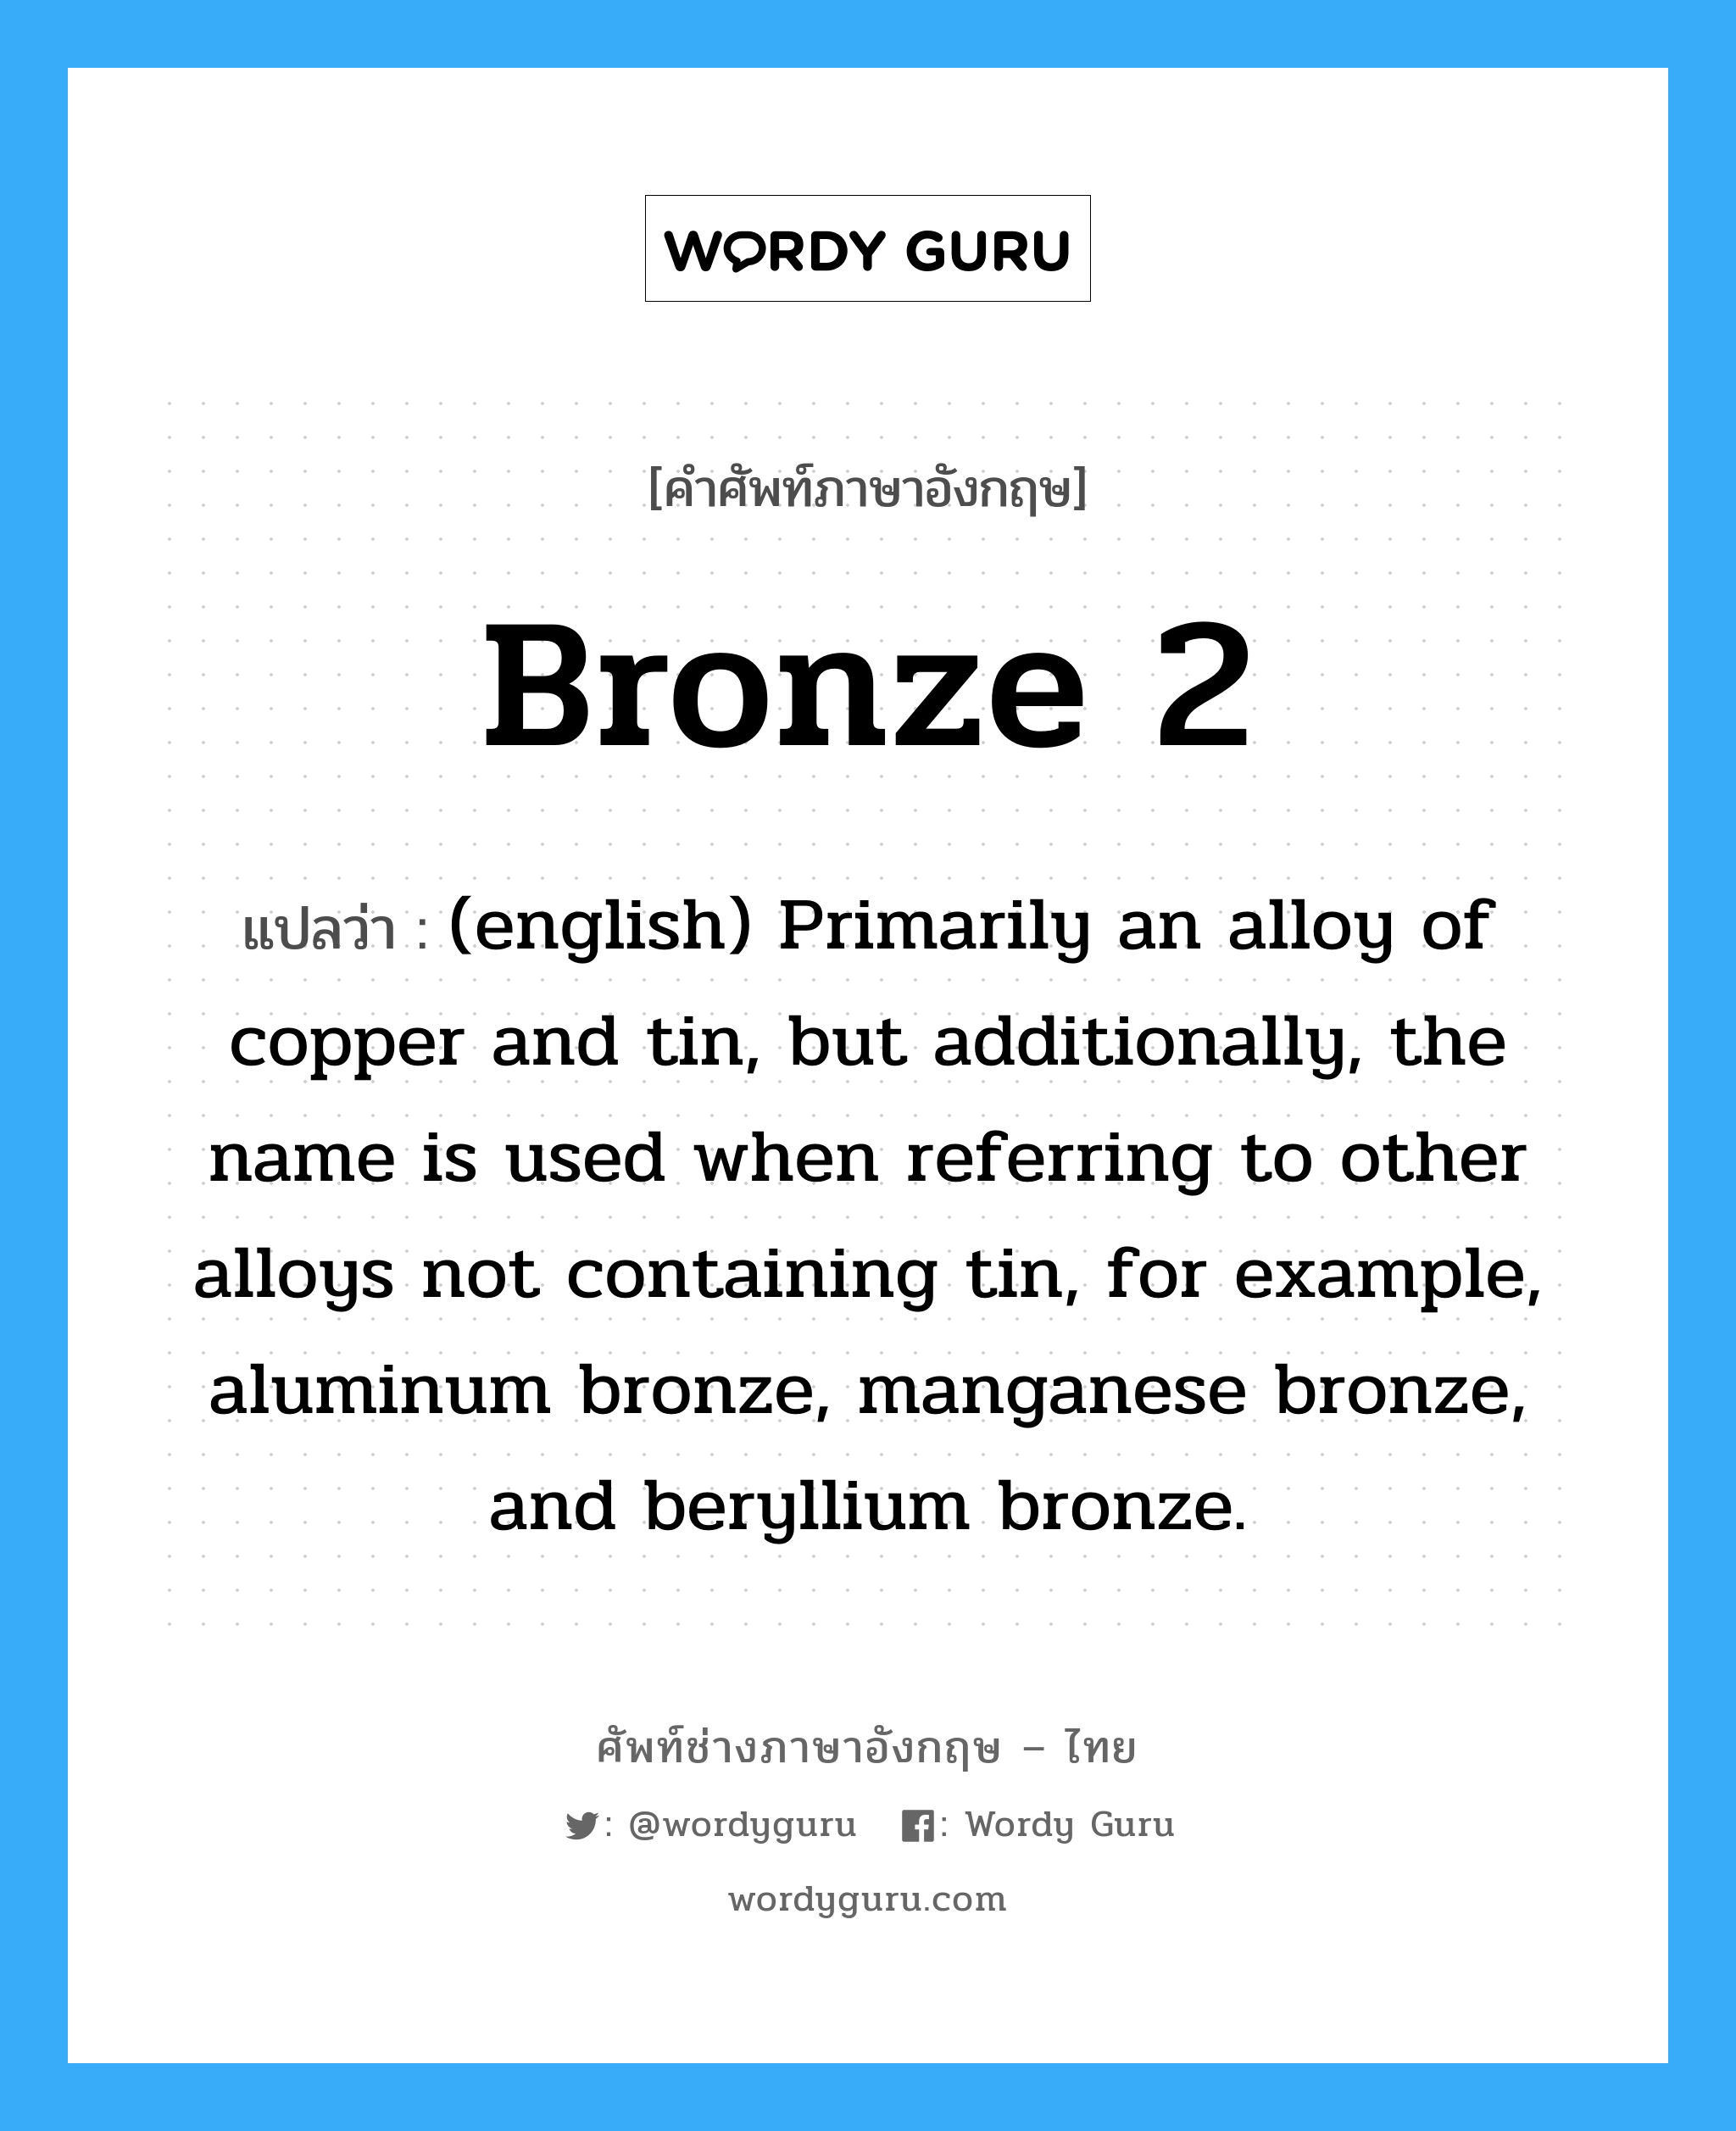 (english) Primarily an alloy of copper and tin, but additionally, the name is used when referring to other alloys not containing tin, for example, aluminum bronze, manganese bronze, and beryllium bronze. ภาษาอังกฤษ?, คำศัพท์ช่างภาษาอังกฤษ - ไทย (english) Primarily an alloy of copper and tin, but additionally, the name is used when referring to other alloys not containing tin, for example, aluminum bronze, manganese bronze, and beryllium bronze. คำศัพท์ภาษาอังกฤษ (english) Primarily an alloy of copper and tin, but additionally, the name is used when referring to other alloys not containing tin, for example, aluminum bronze, manganese bronze, and beryllium bronze. แปลว่า Bronze 2